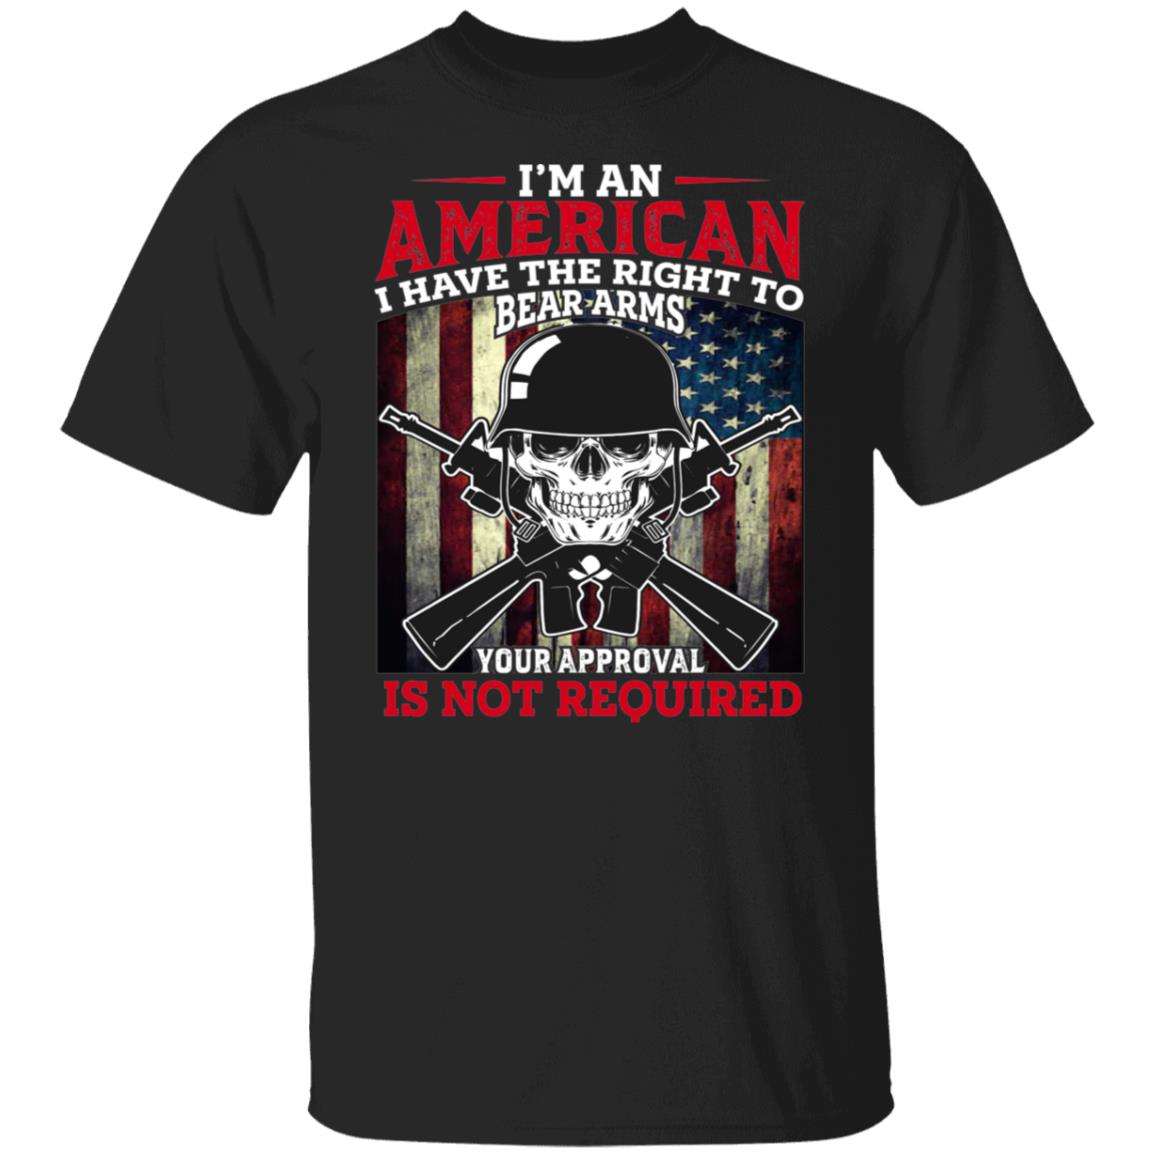 I'm An American I Have The Right To Bear Arms Your Approval is Not Required T-Shirt